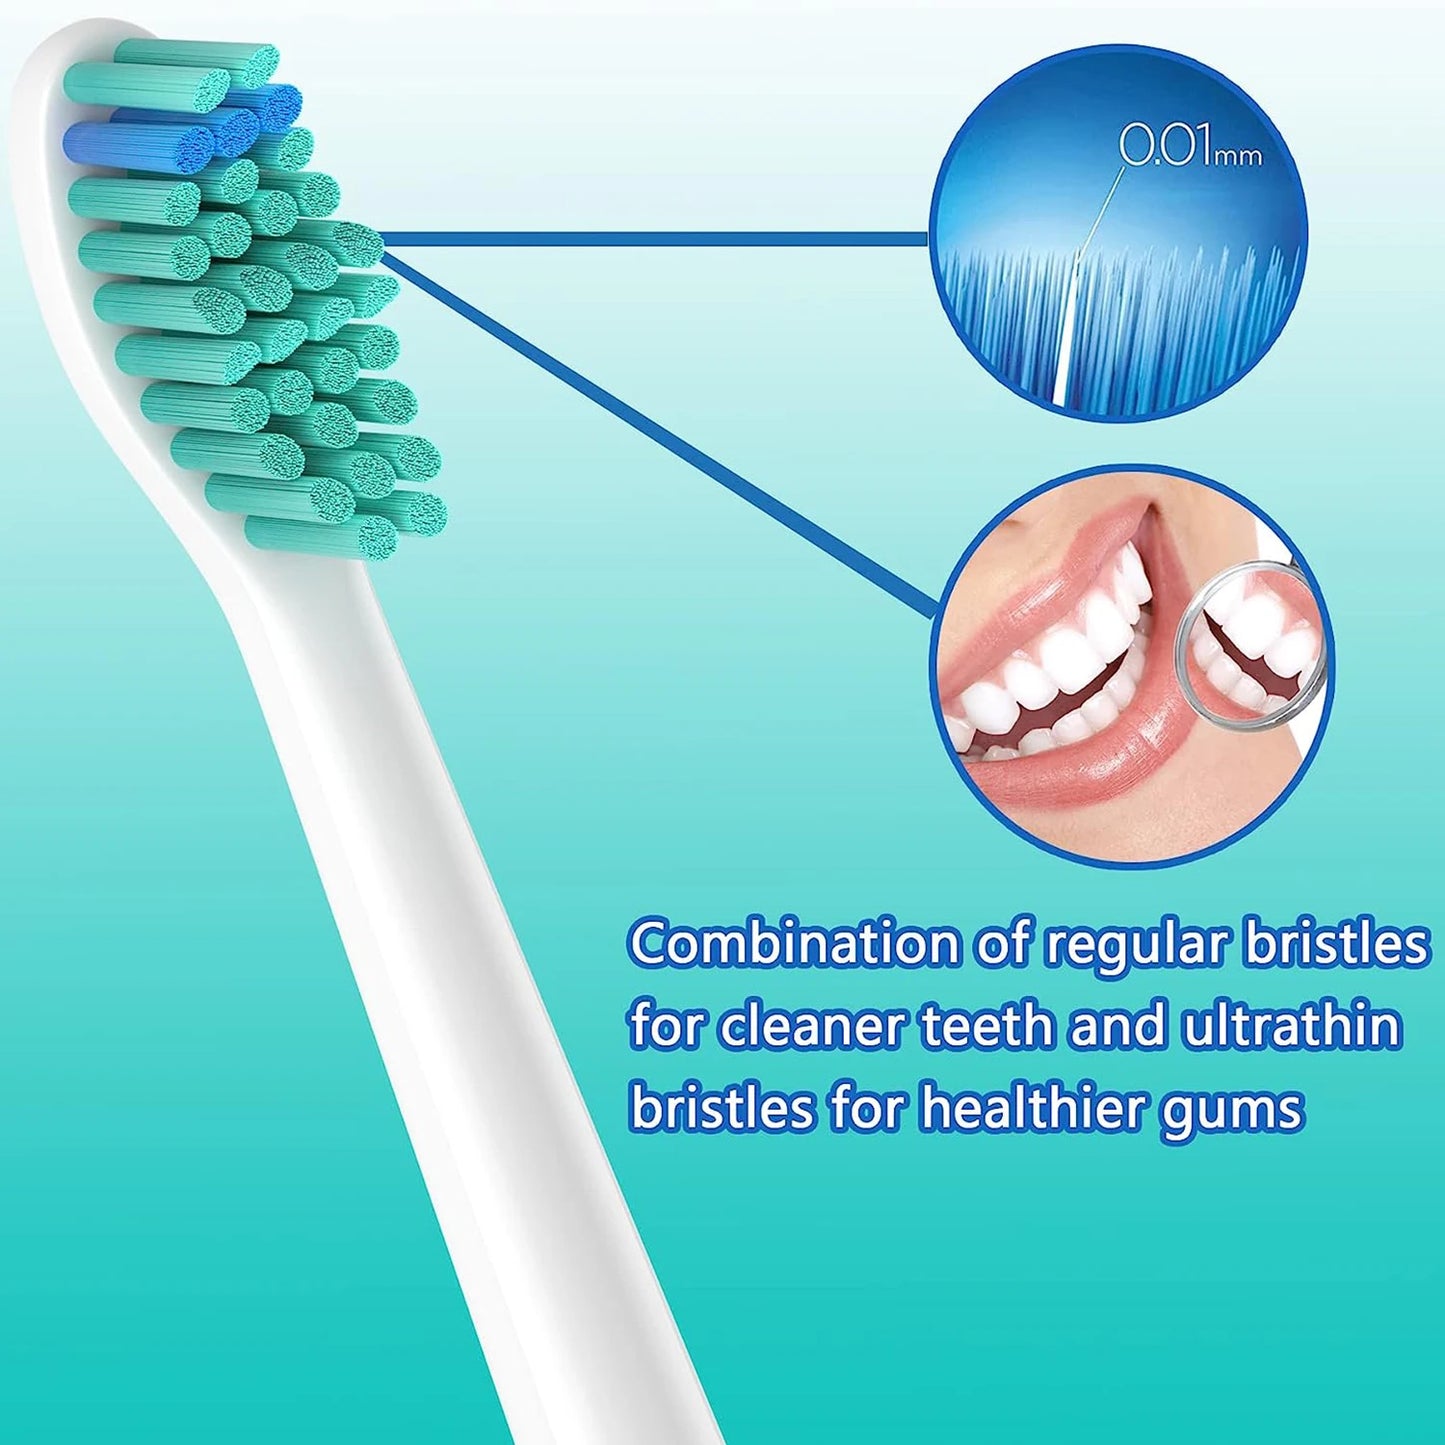 Replacement Toothbrush Heads Compatible with Philips Sonicare Electric Toothbrushes HX6530 HX9340 HX6930 HX6710 HX9140 HX6921